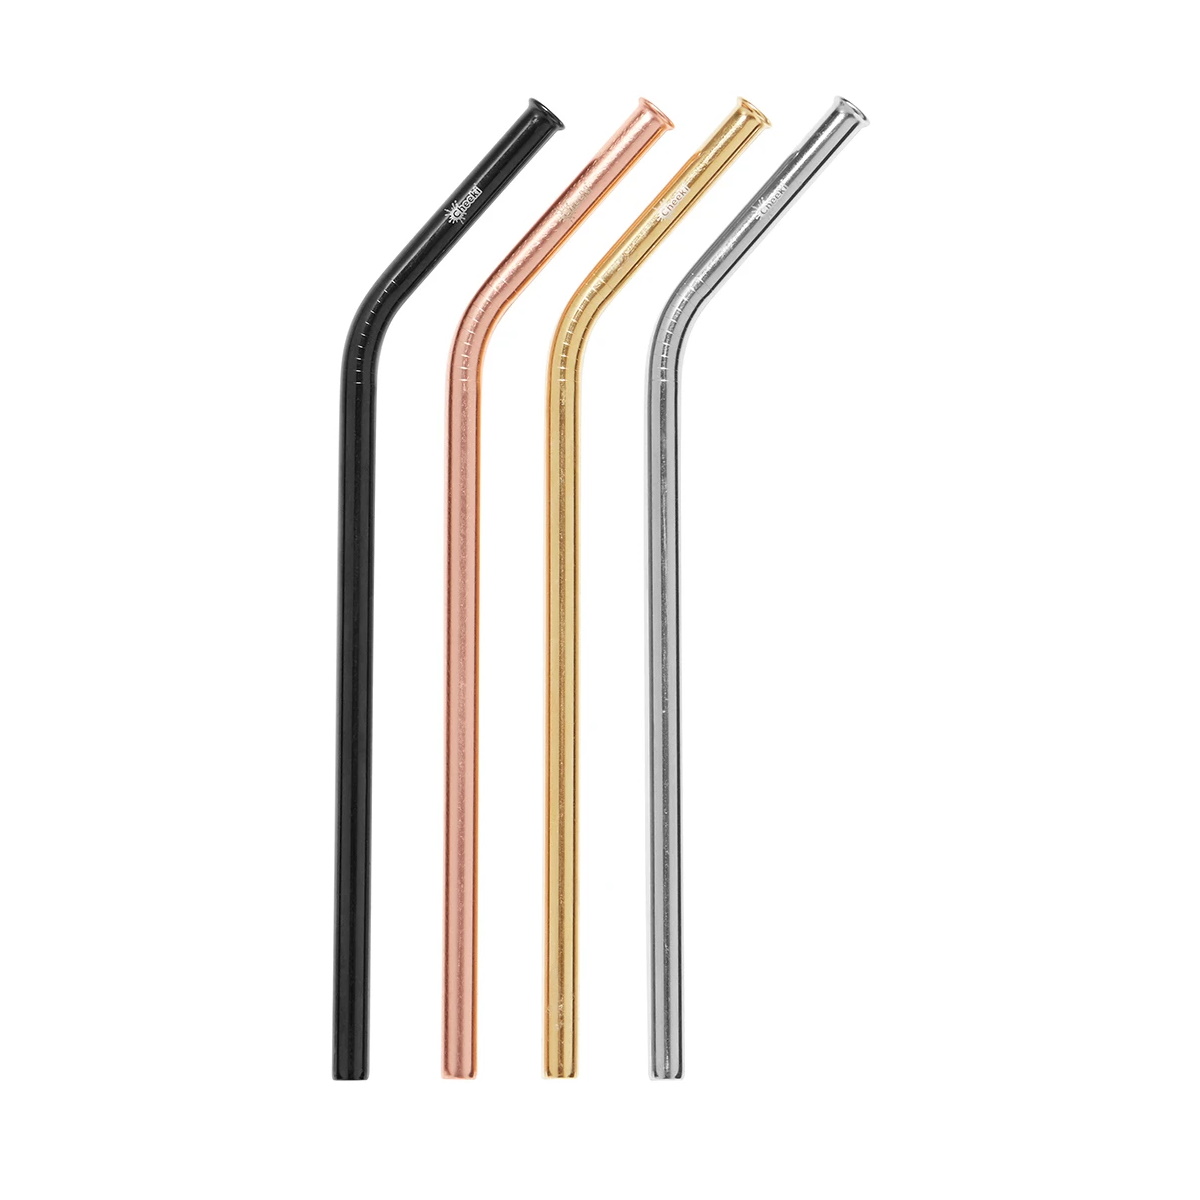 Cheeki Bent Stainless Steel Straw - Silver, Gold, Rose Gold or Black (Assorted) - 1 Straw